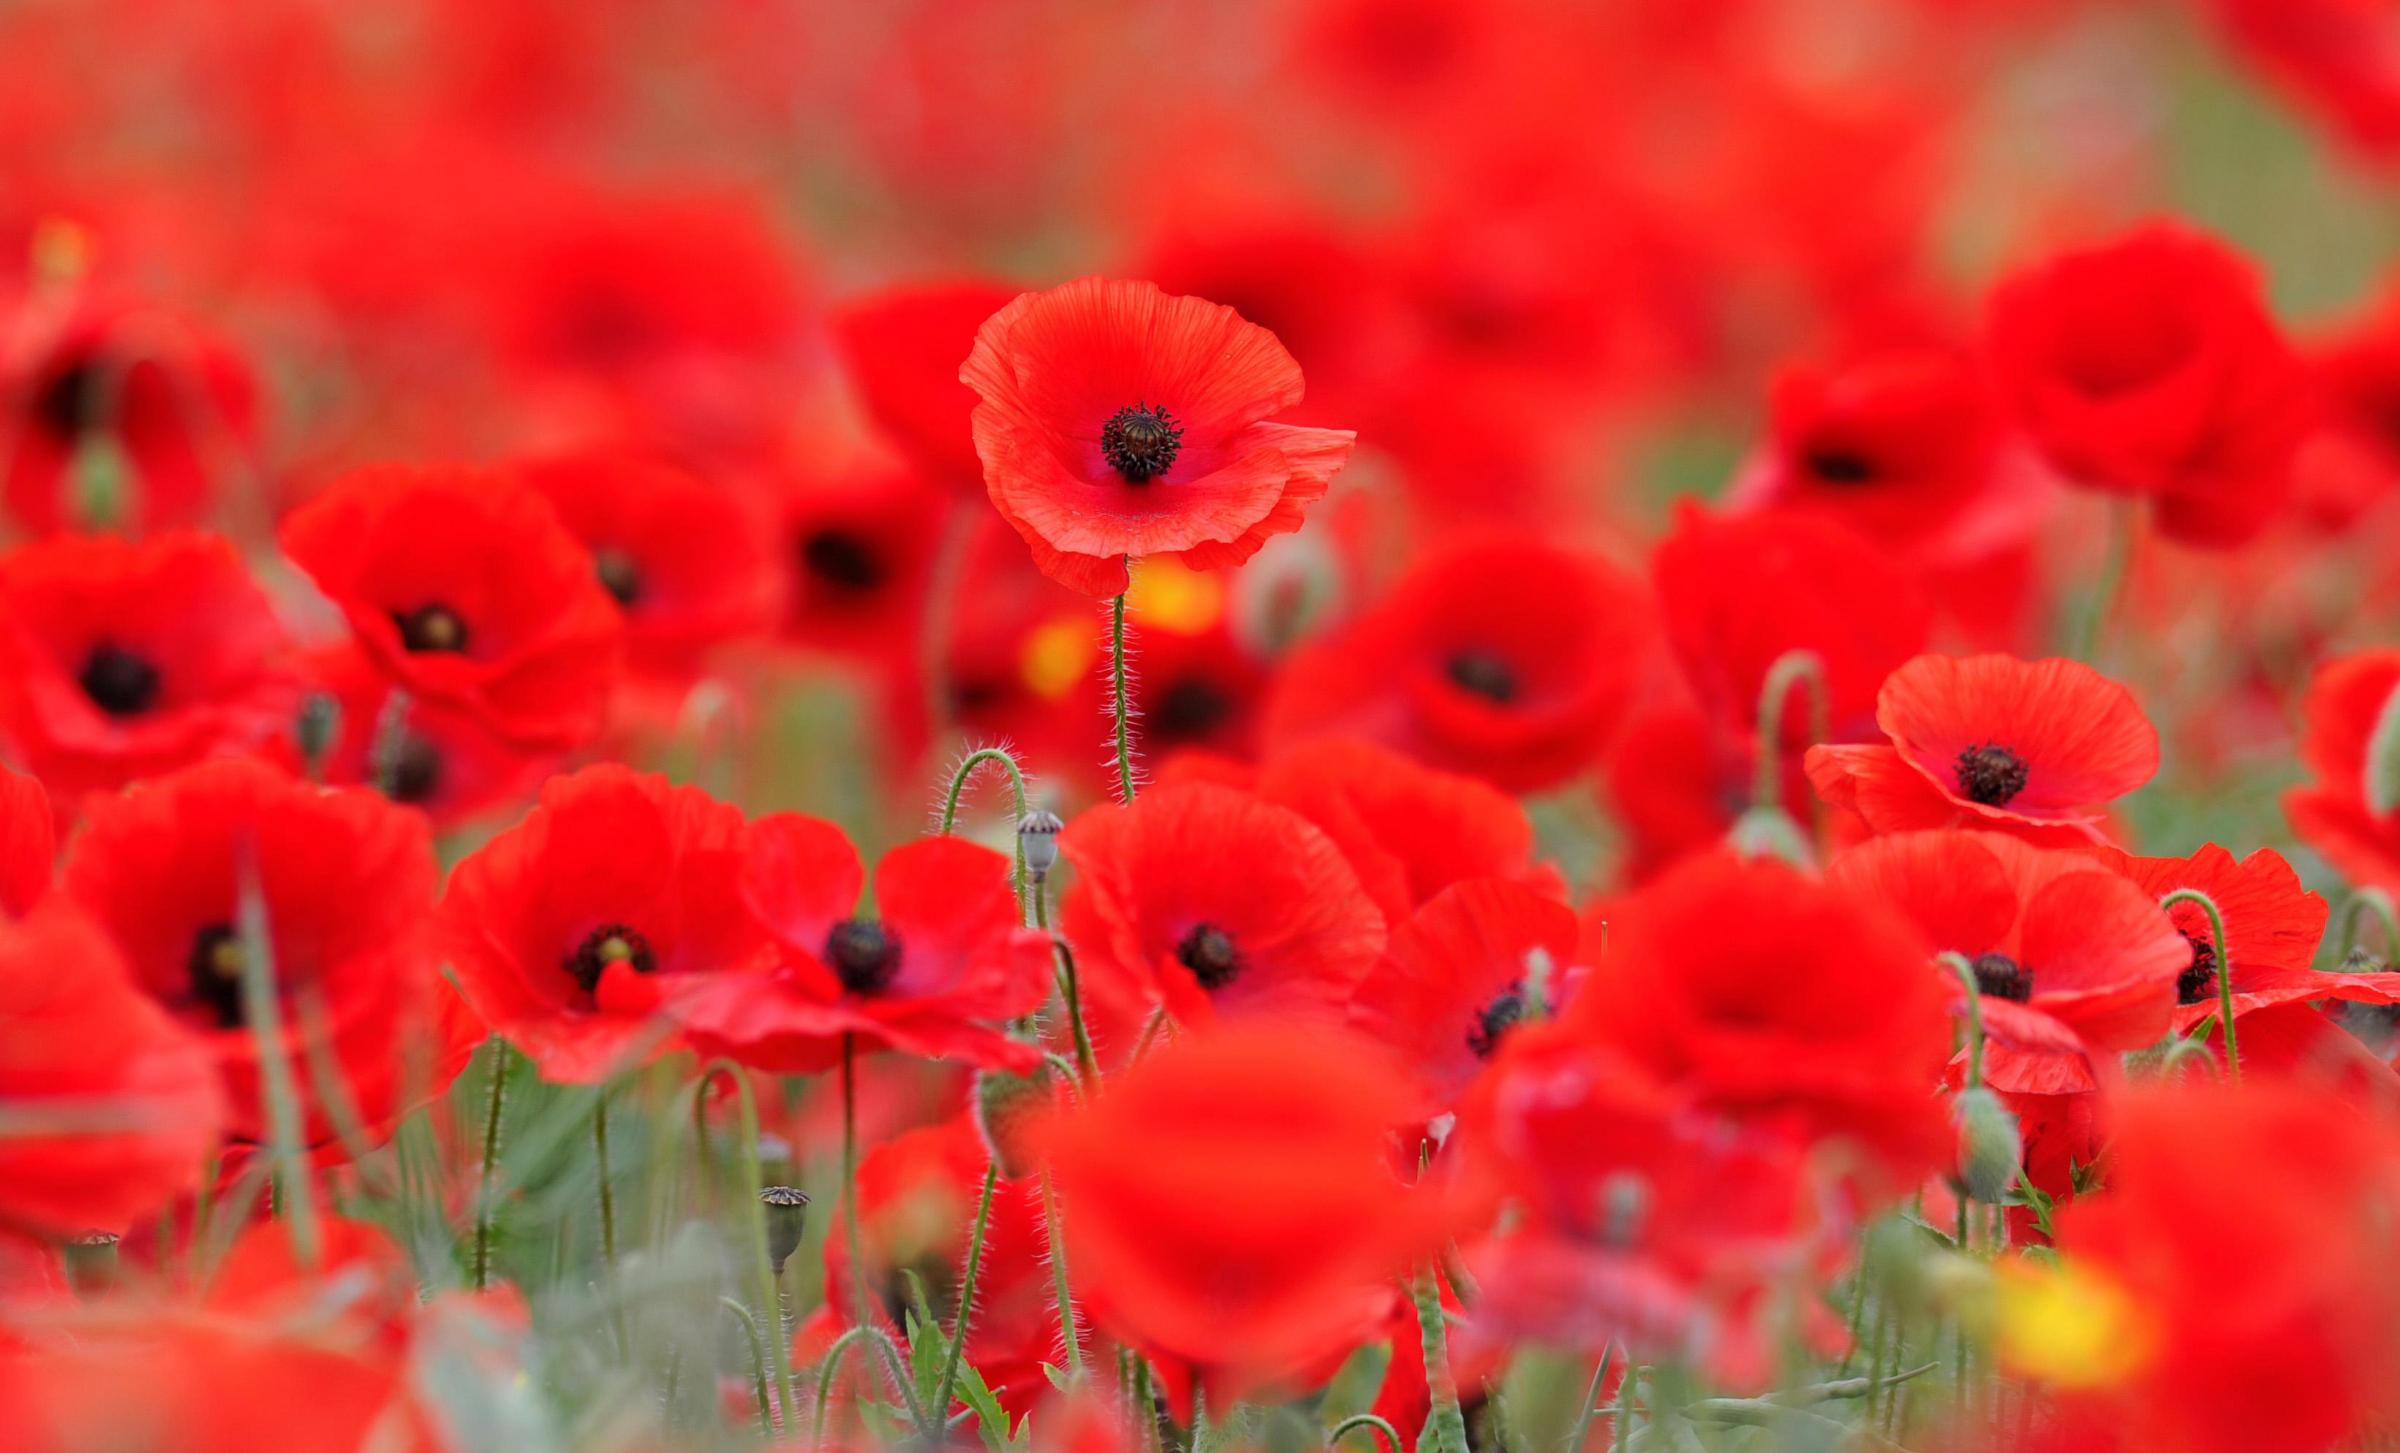 Candles, poems and music for First World War remembrance evening